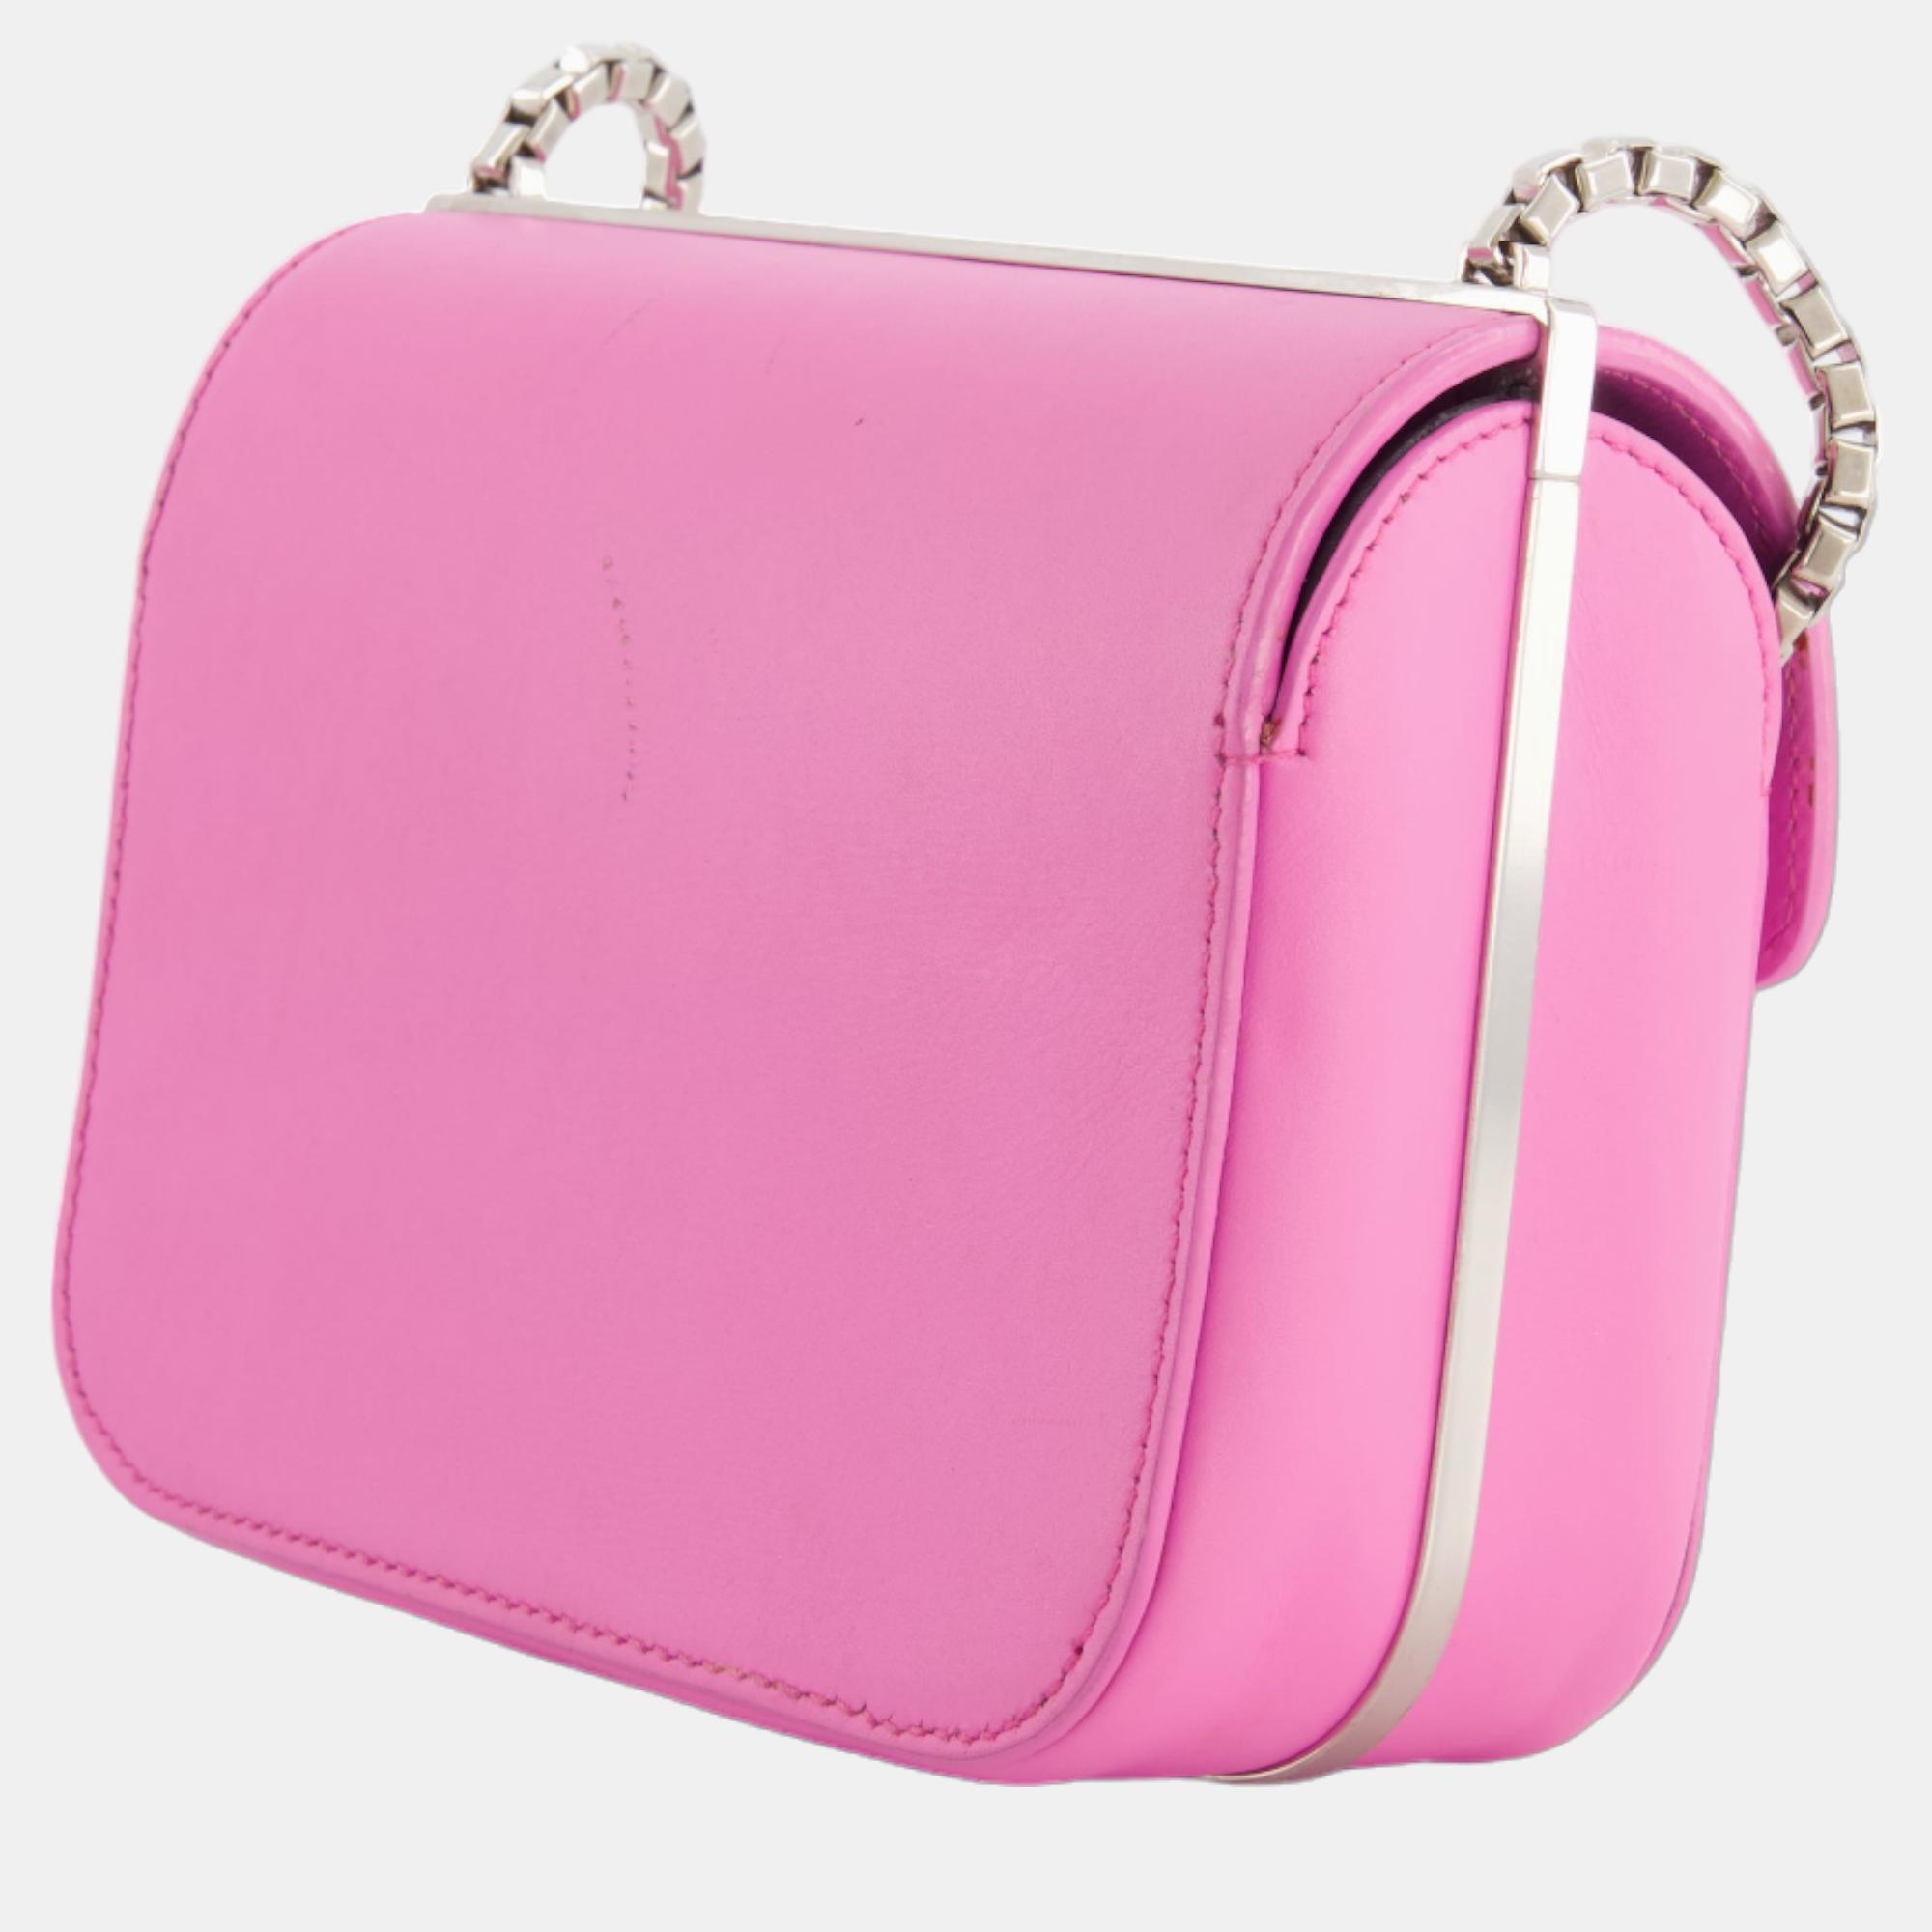 Balenciaga Candy Pink Small Leather Bag With Silver And Gold Hardware